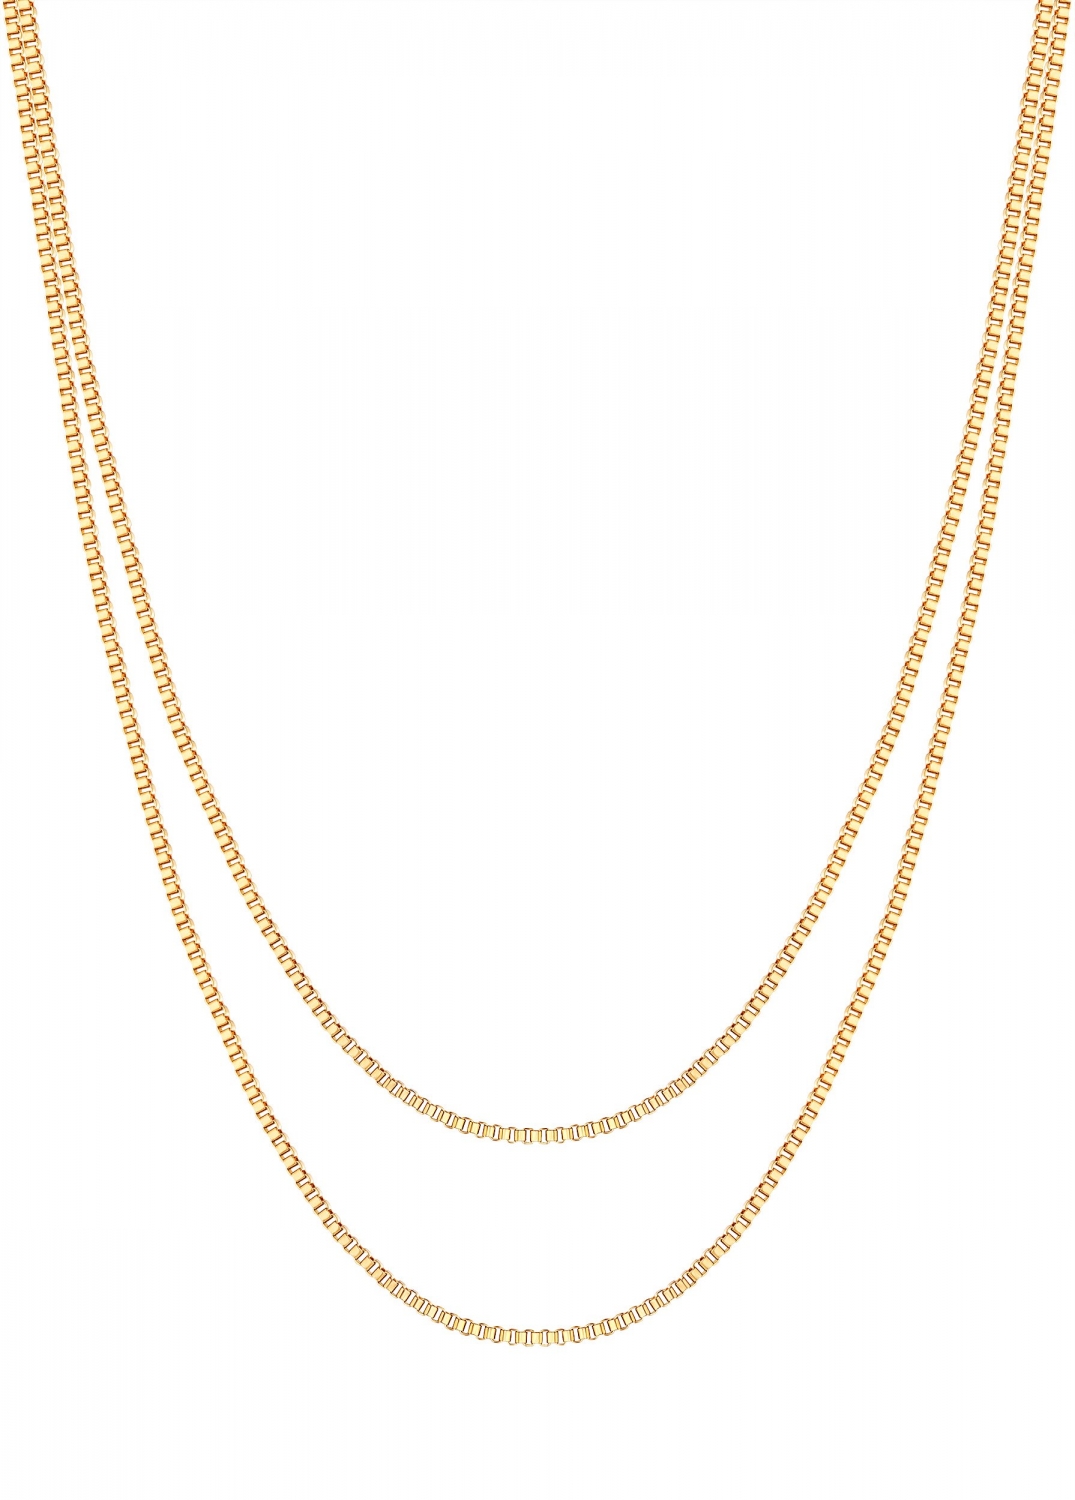 NL Double Chain - Gold - Necklaces - Northern Legacy